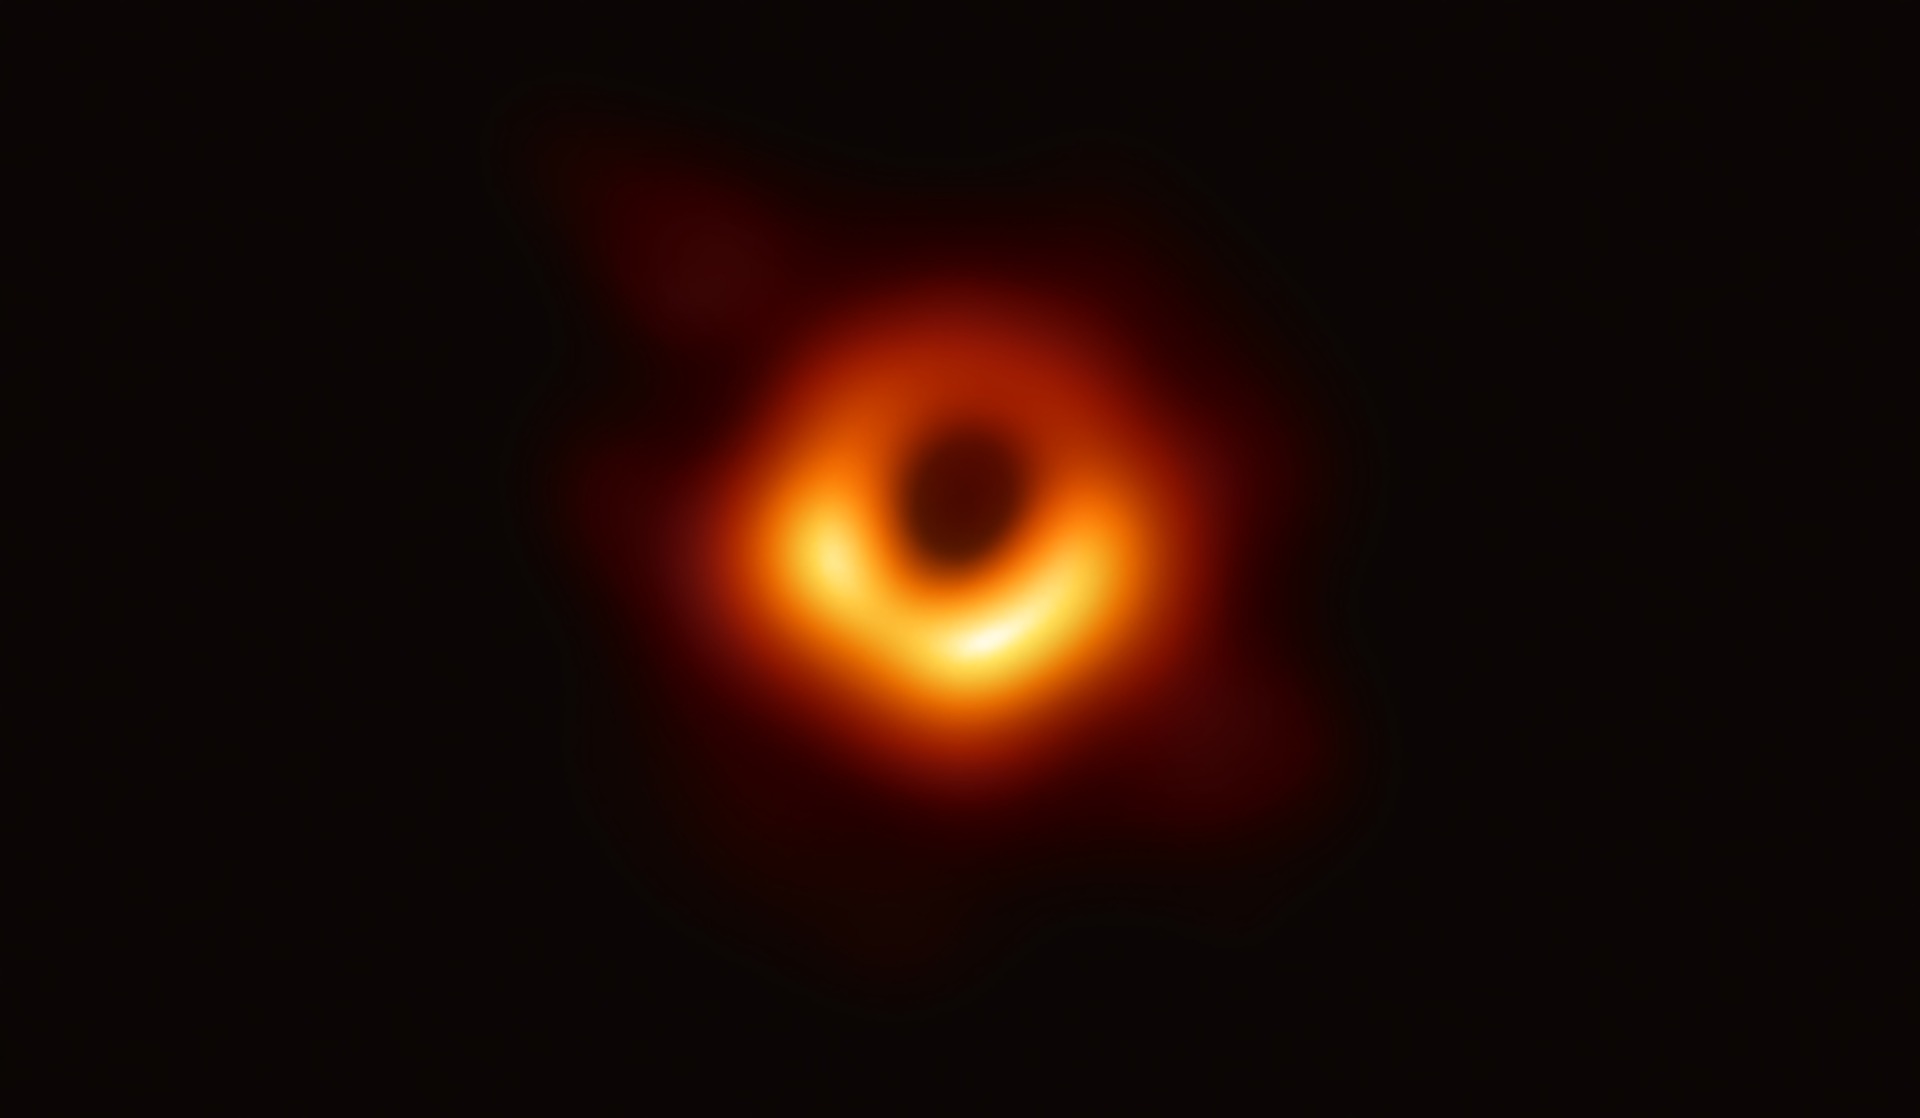 Fuzzy red ring of light around the first-ever photographed black hole